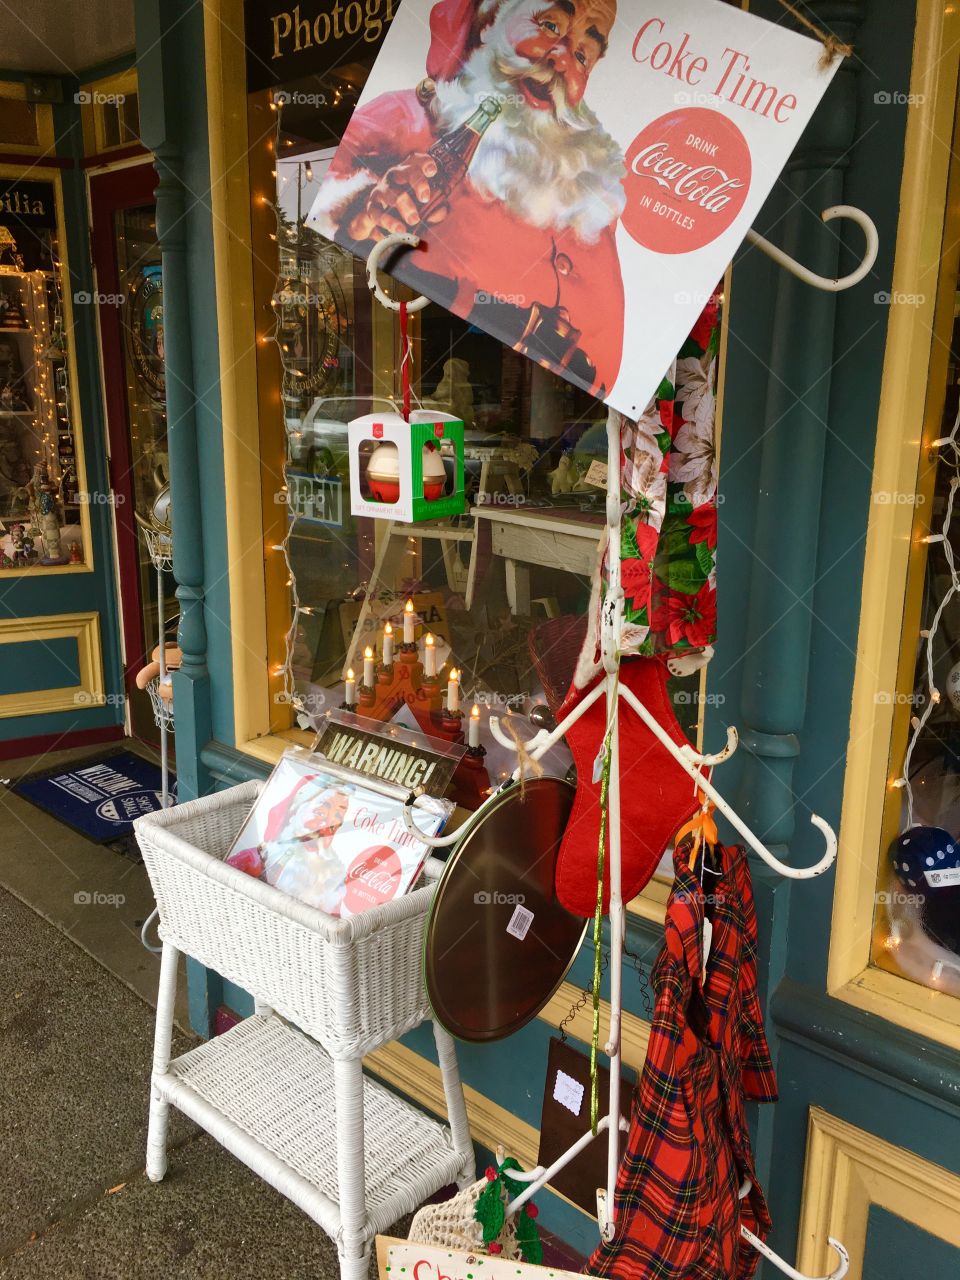 It must be Christmas - Store display on street, Poulsbo, WA